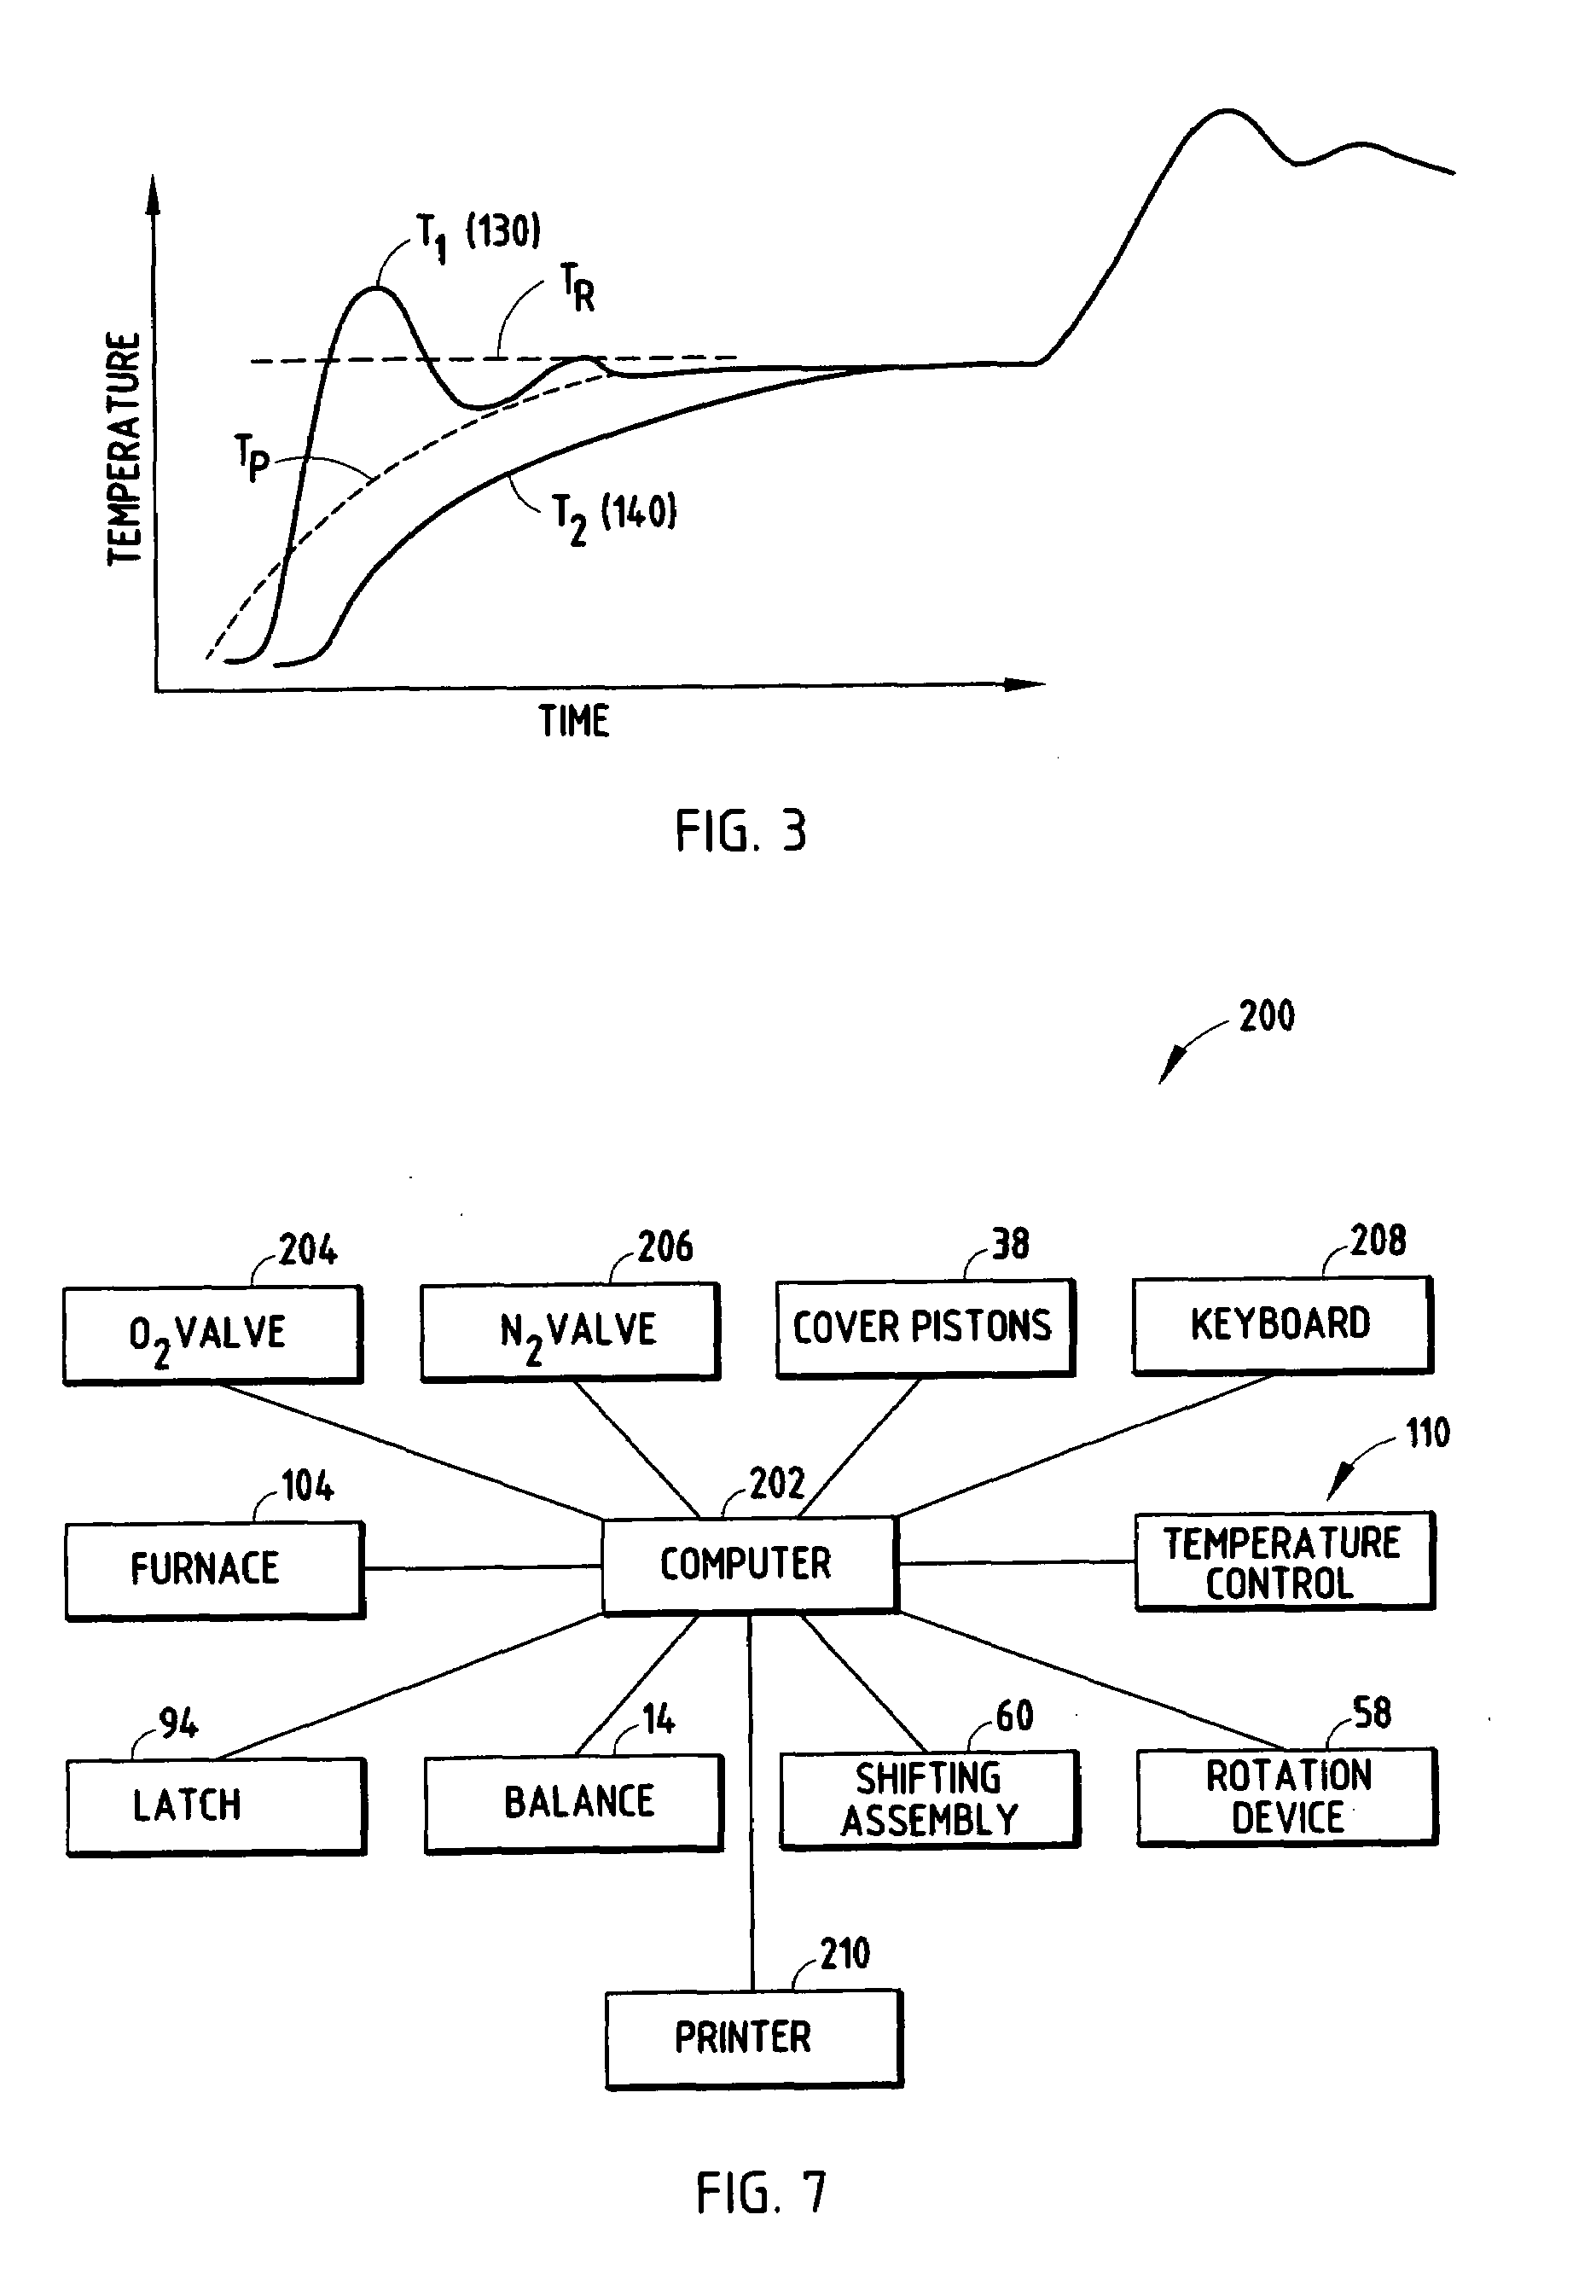 Analytical furnace with predictive temperature control